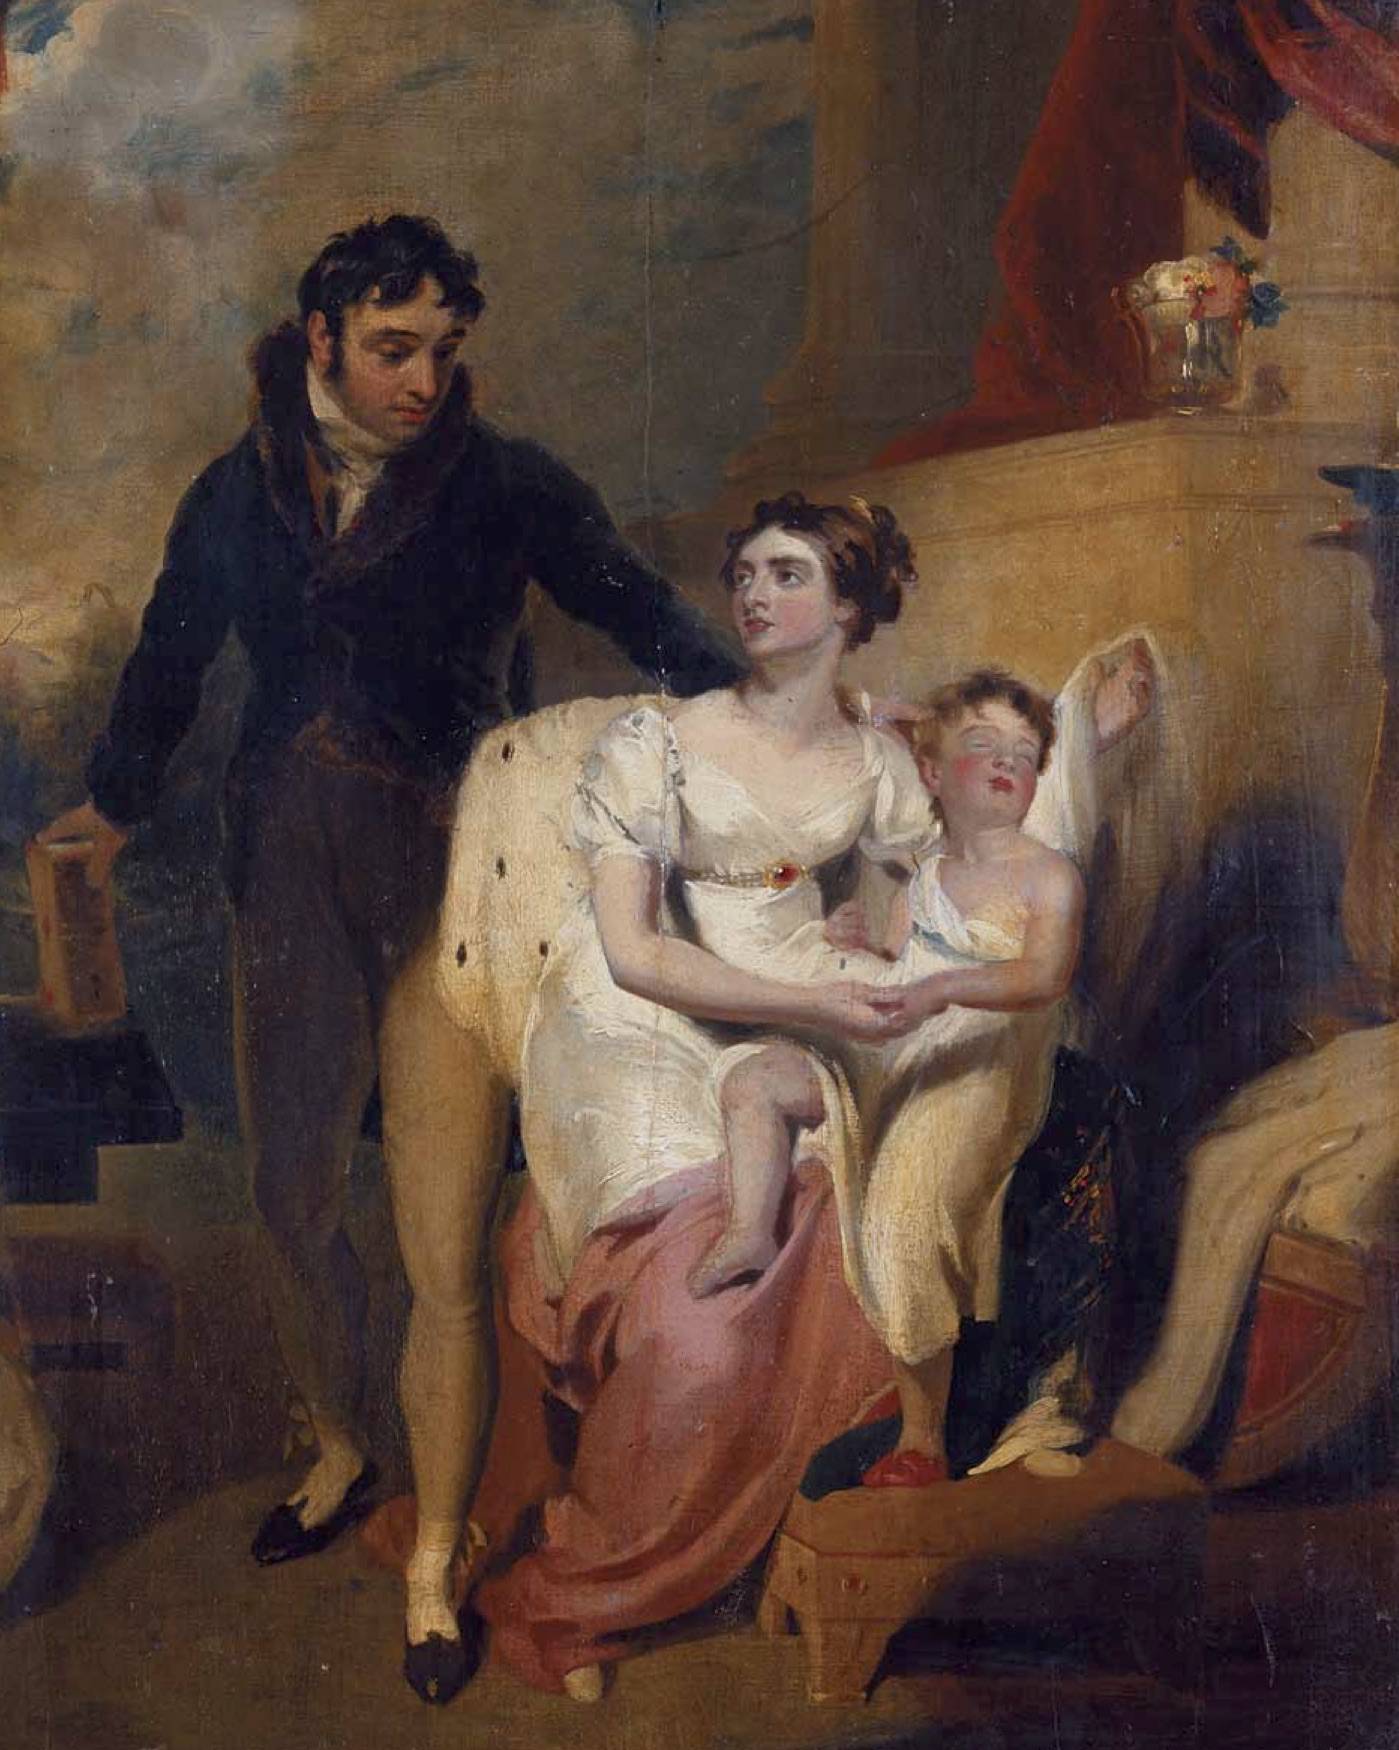 Family Portrait by Thomas Lawrence (1769-1830), featuring Francis William Caulfeild, 2nd Earl of Charlemont with his wife Anne Caulfeild (née Bermingham) and their son. Oil on panel, 52cm x 45cm. 